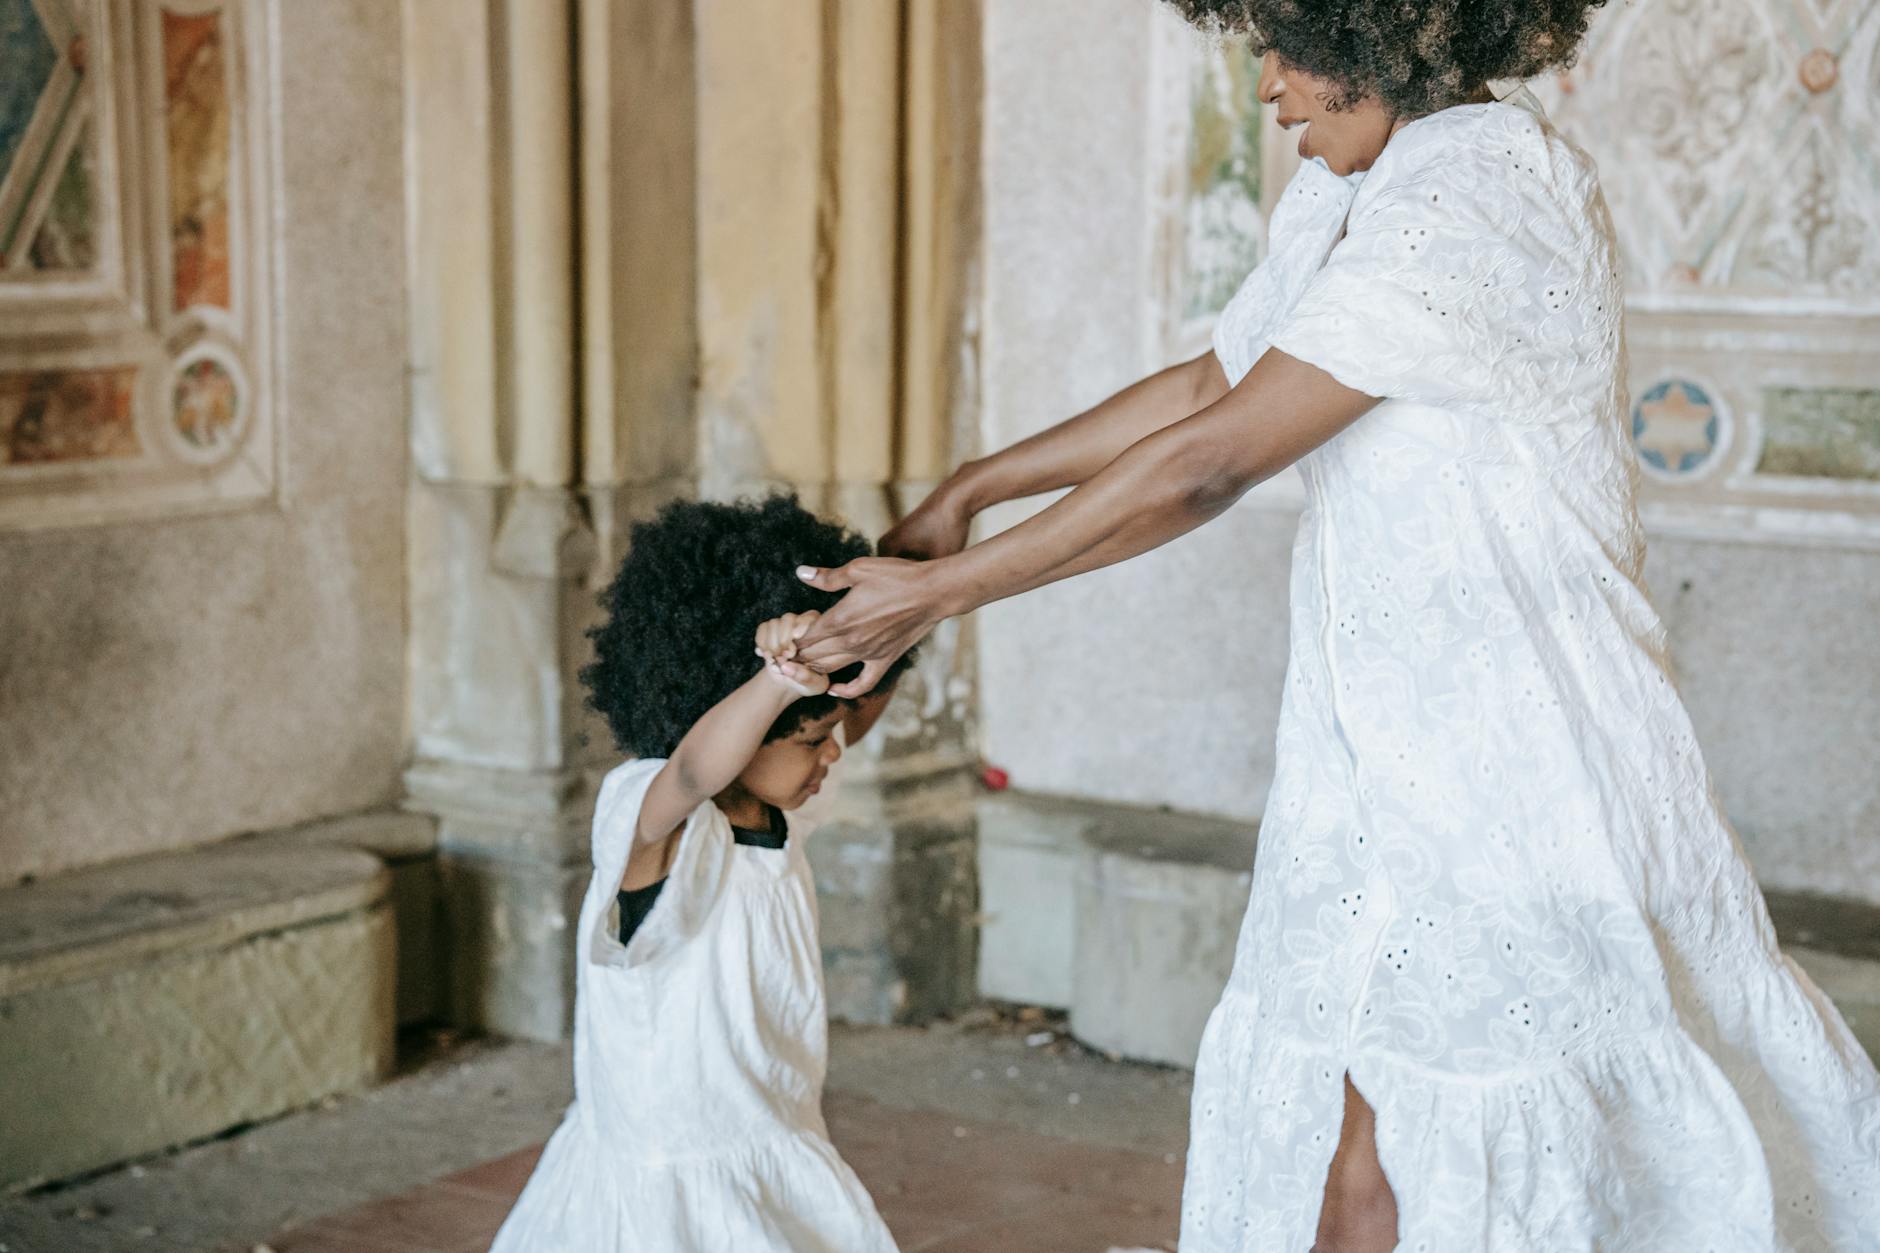 a woman dancing with her daughter